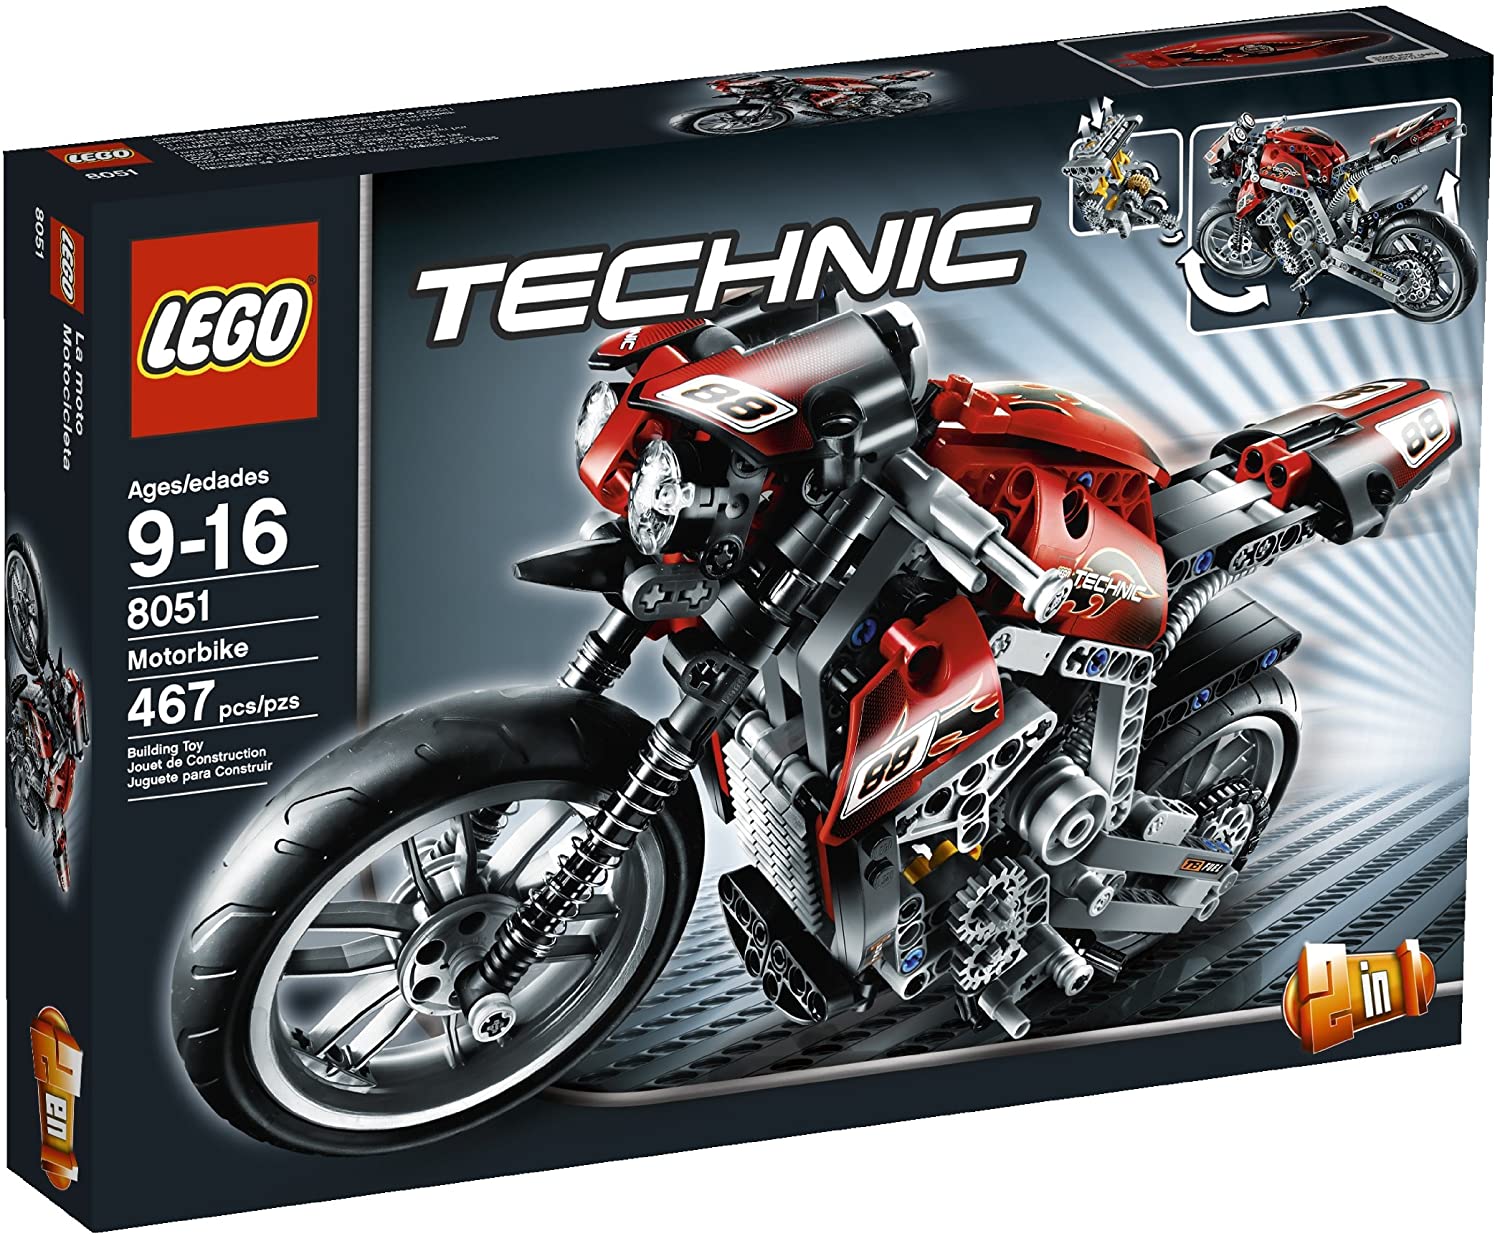 7 Best LEGO Motorcycle Sets 2023 - Buying Guide & Reviews 2